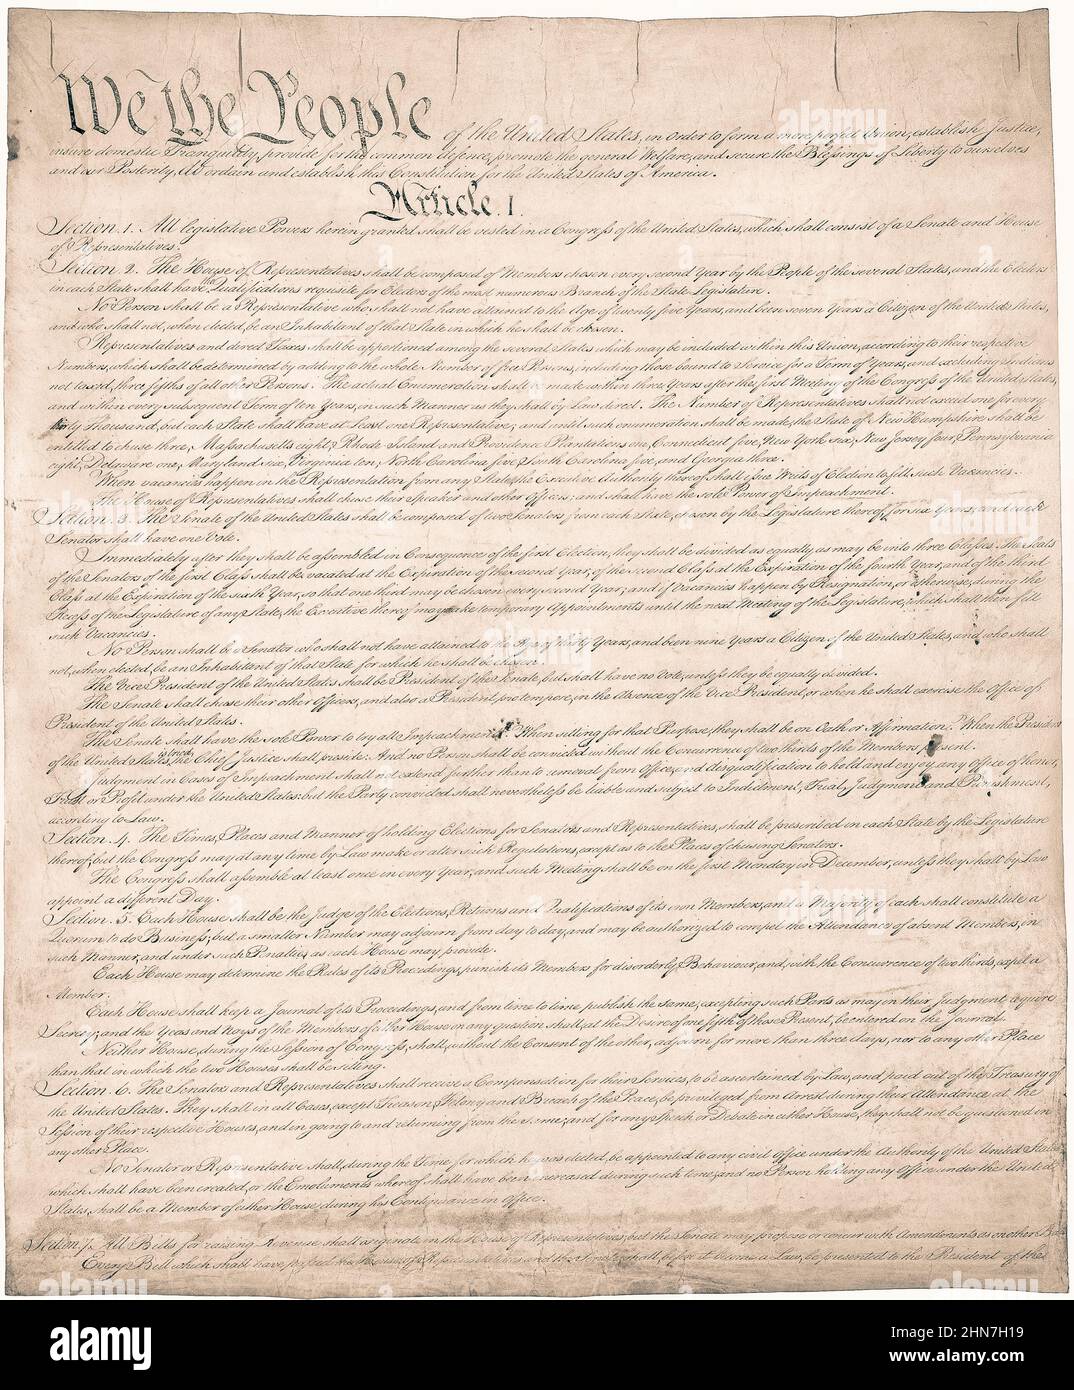 The Constitution of the United States. We the People of the United States, in Order to form a more perfect Union, establish Justice, insure domestic Tranquility, provide for the common defence, promote the general Welfare, and secure the Blessings of Liberty to ourselves and our Posterity, do ordain and establish this Constitution for the United States of America. --Preamble to the United States Constitution Stock Photo